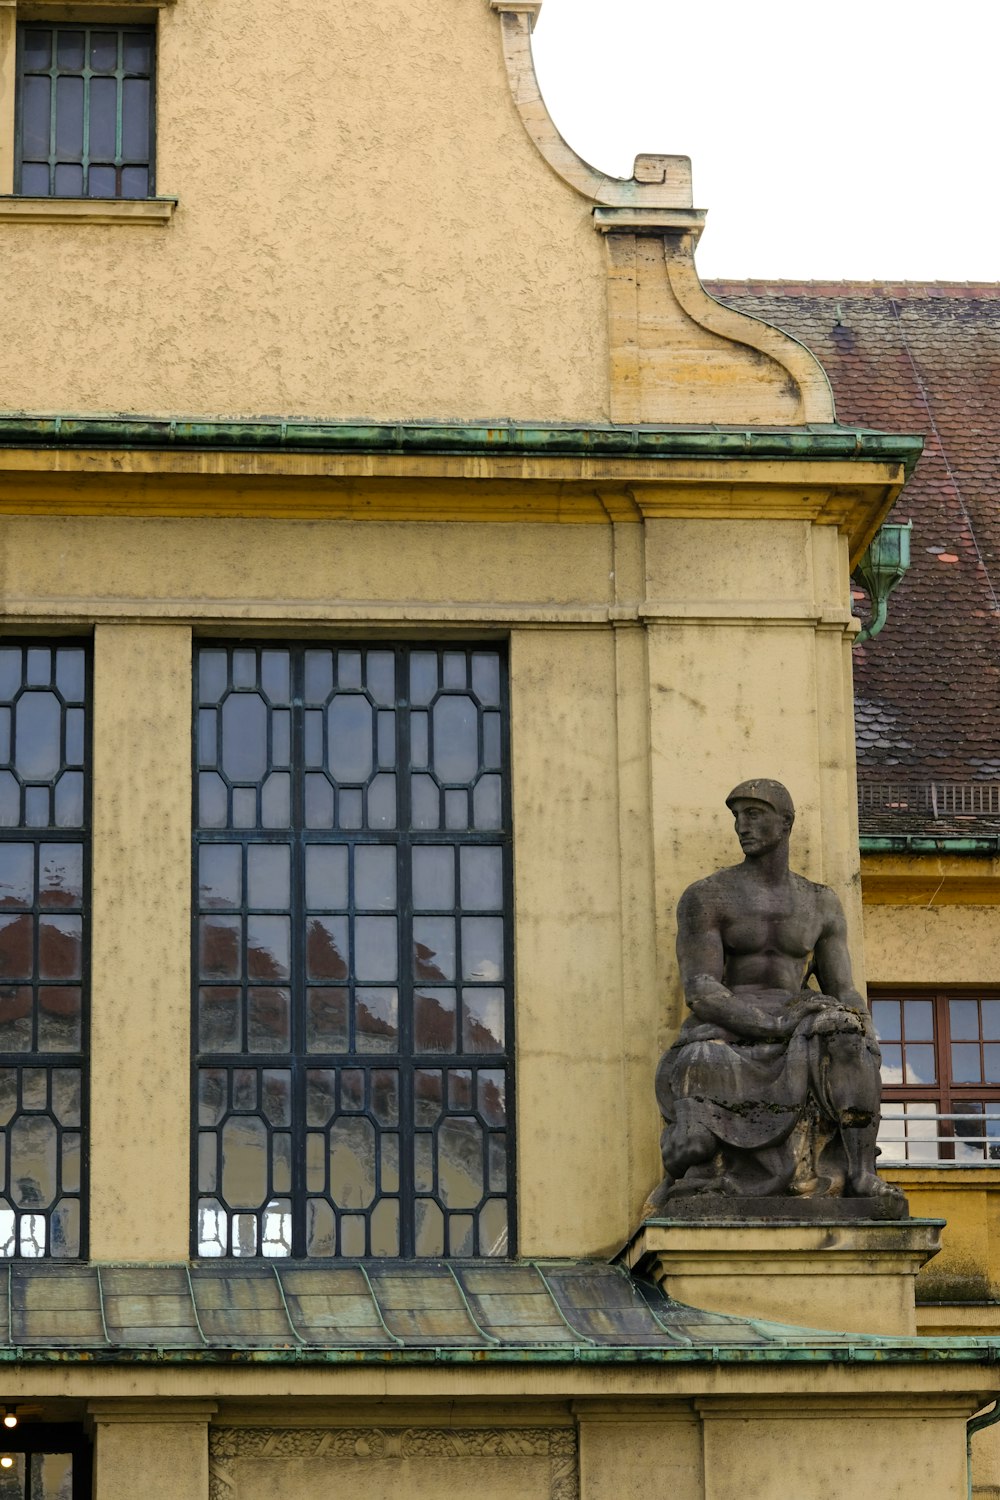 a statue of a man sitting on a bench in front of a building